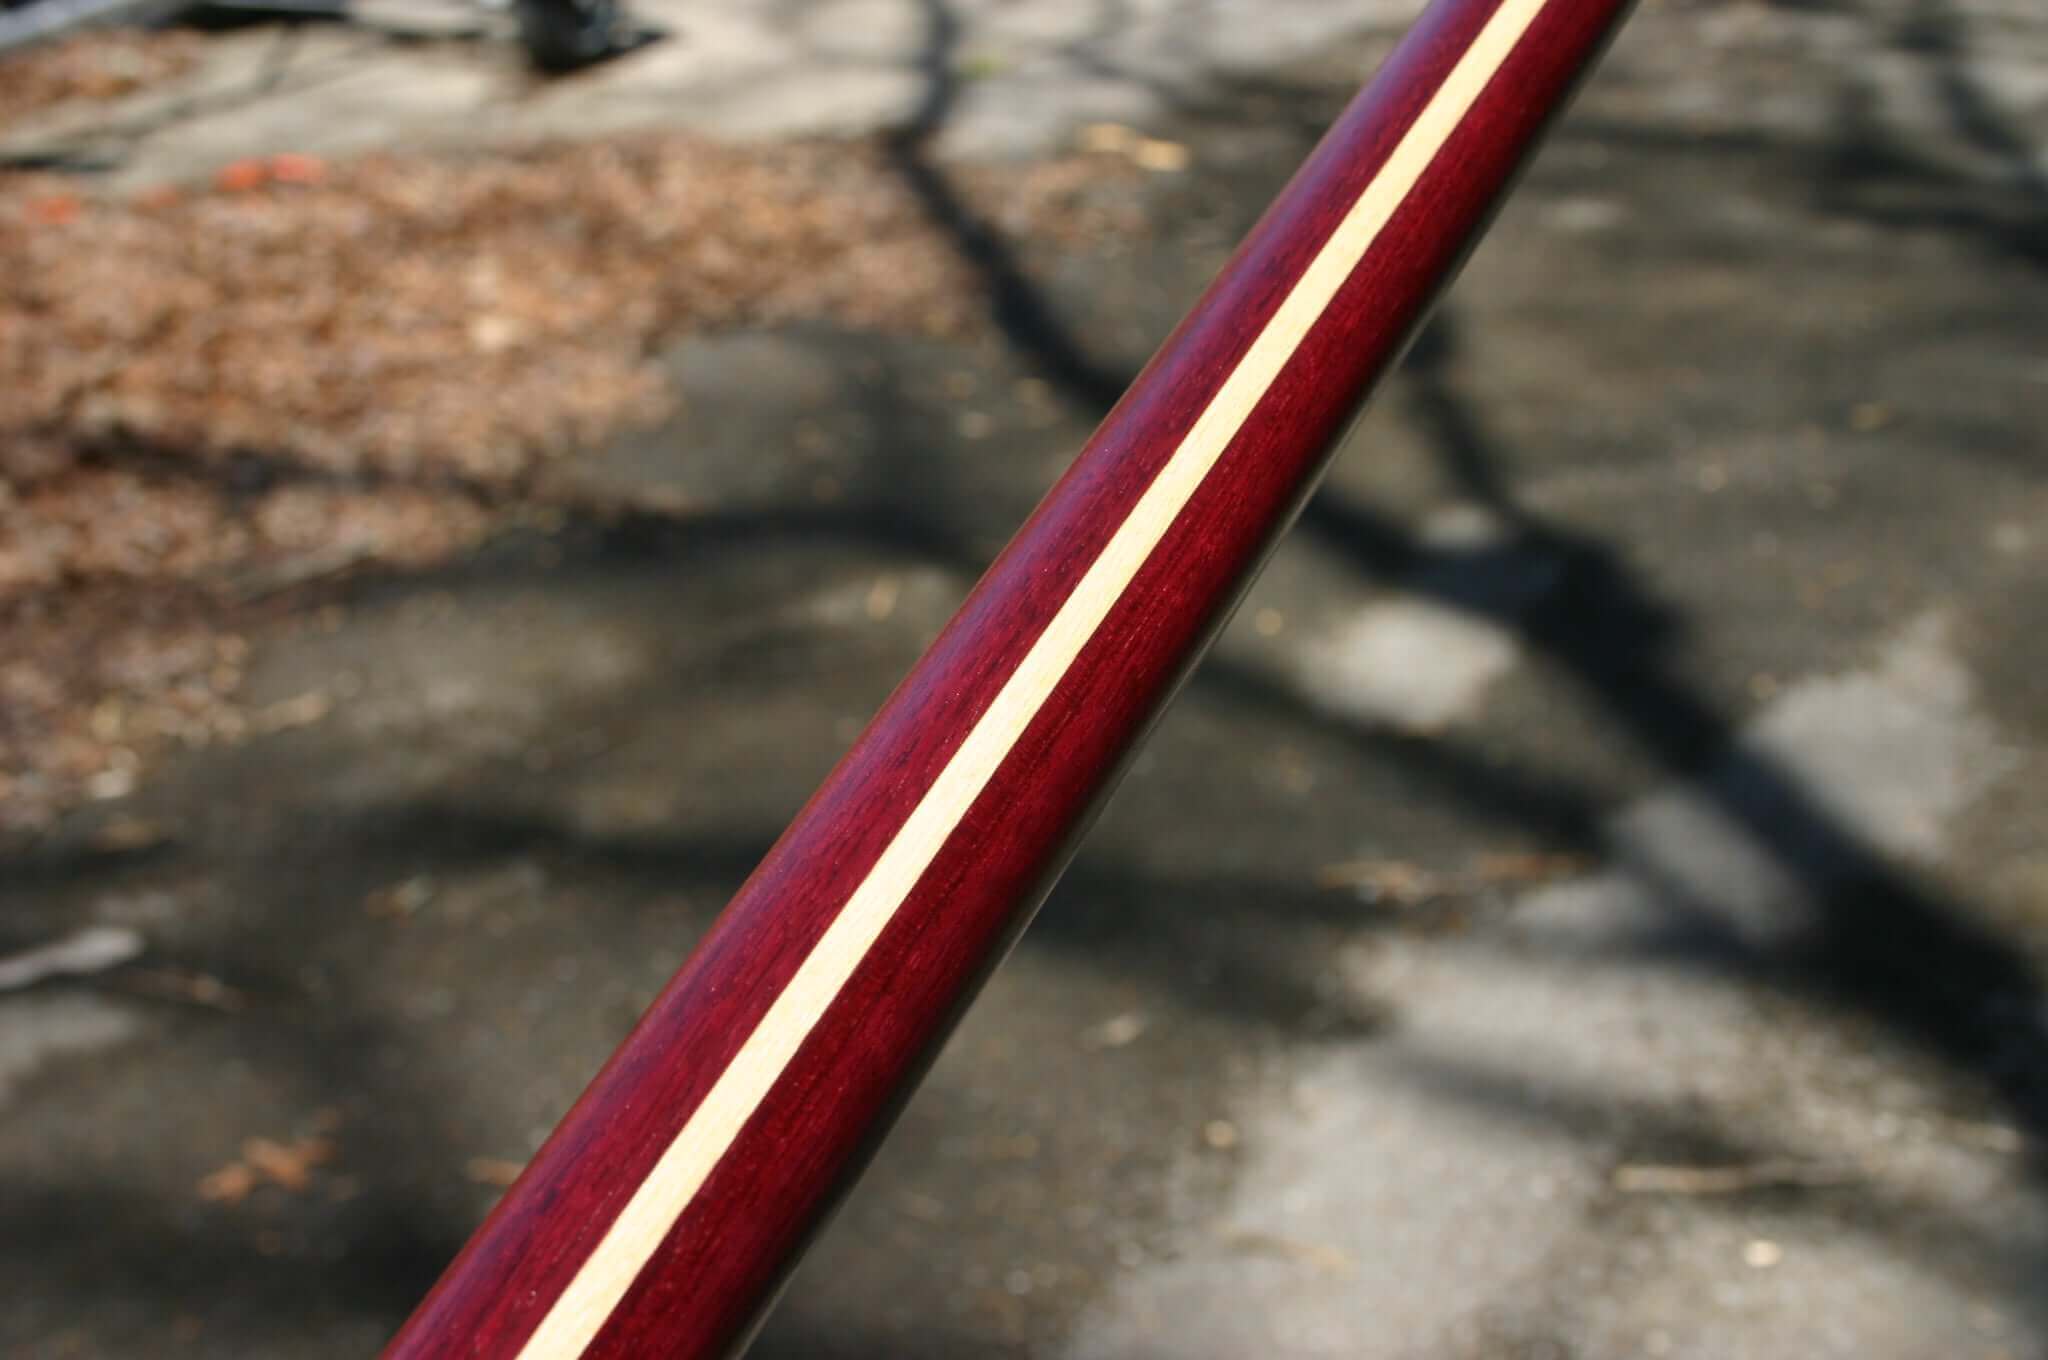 Purpleheart is an upgrade to rattan staffs for karate